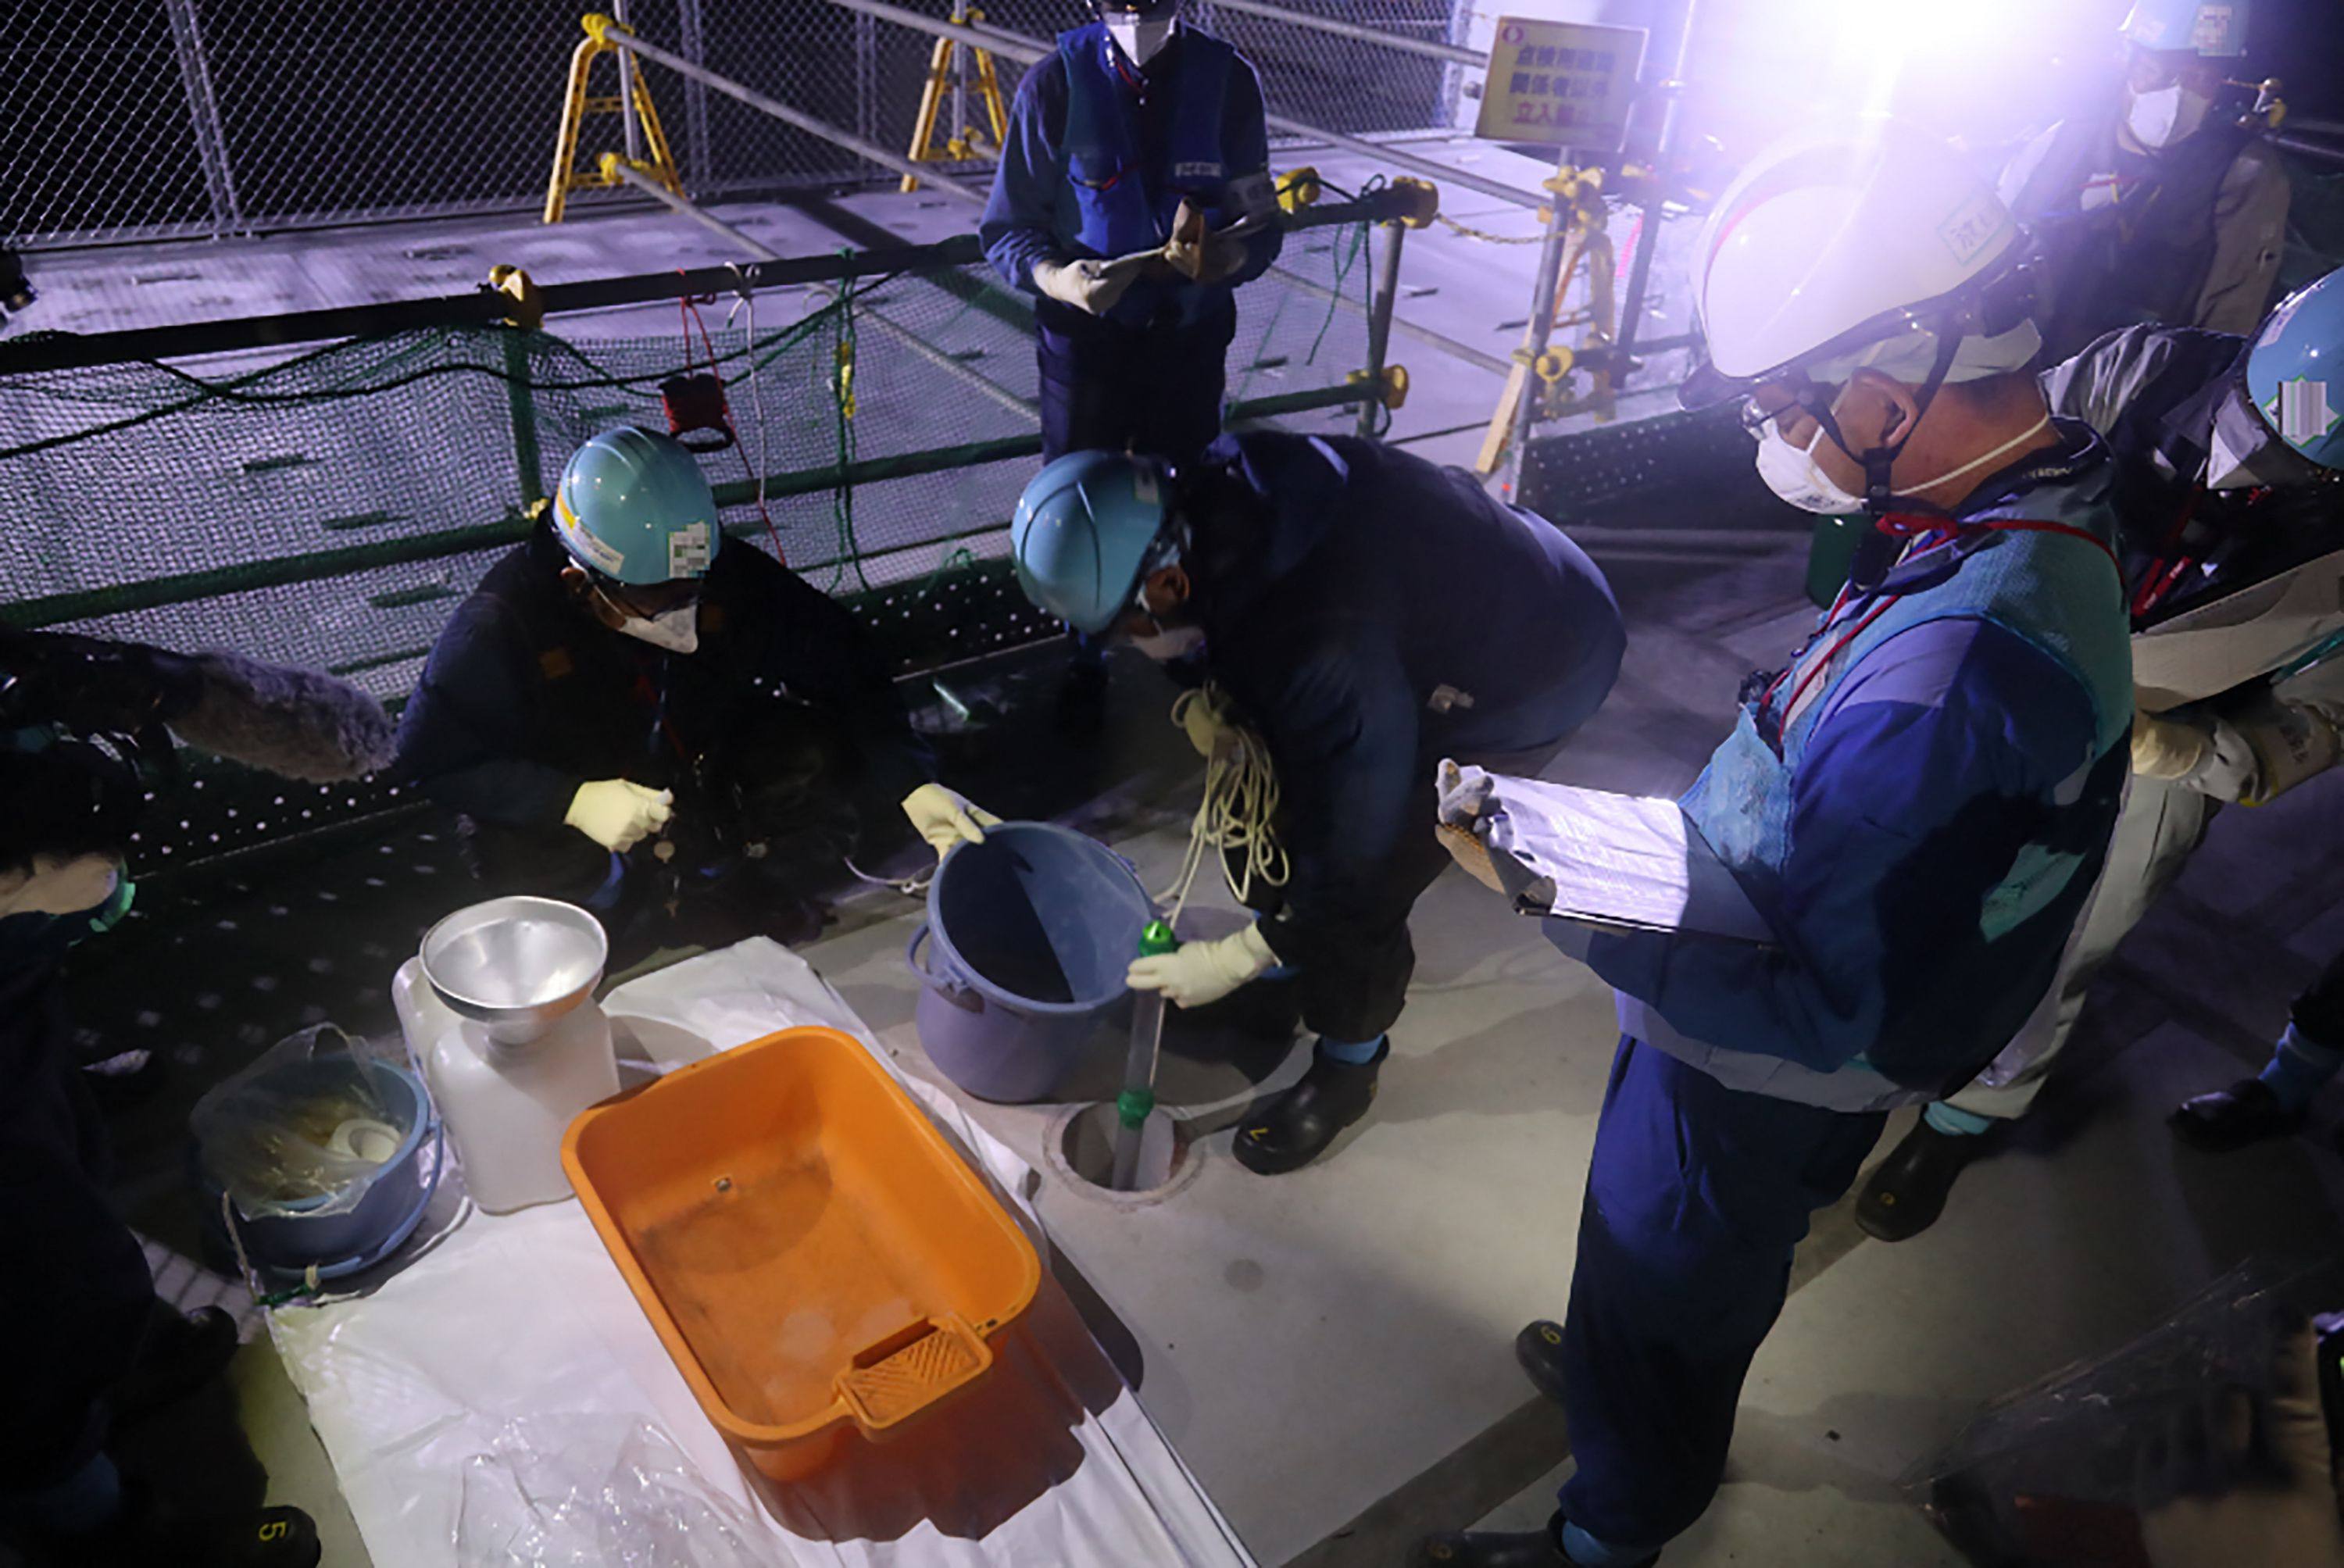 Tepco employees sample treated waste water at the Fukushima Daiichi nuclear power plant on Tuesday ahead of the planned start of its release into the Pacific Ocean. Photo: Tepco Handout via AFP